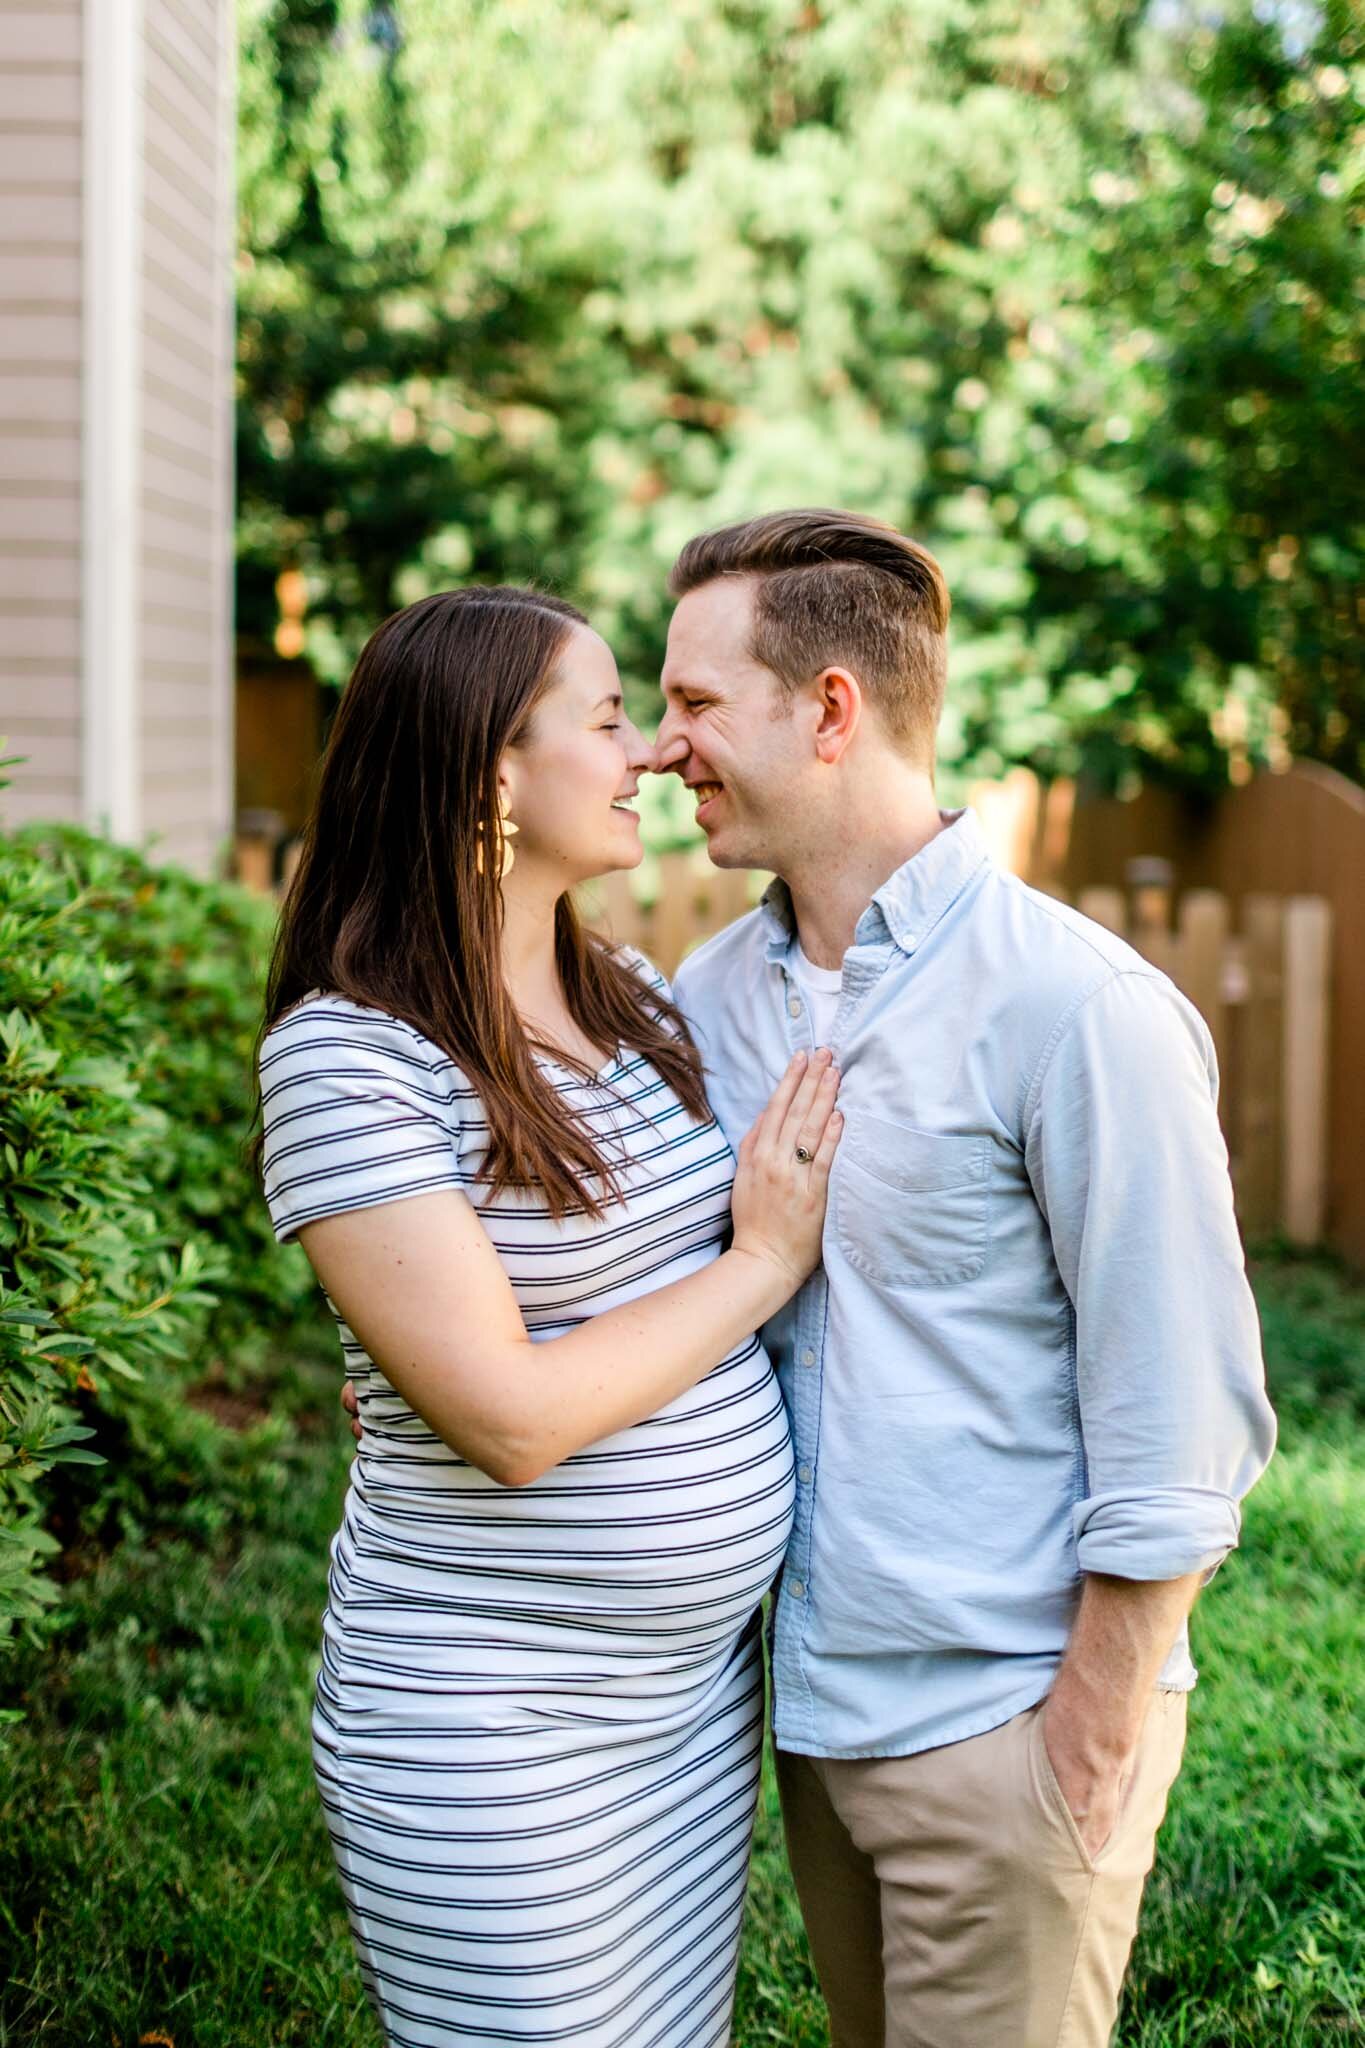 Durham Maternity Photographer | By G. Lin Photography | Couple laughing together